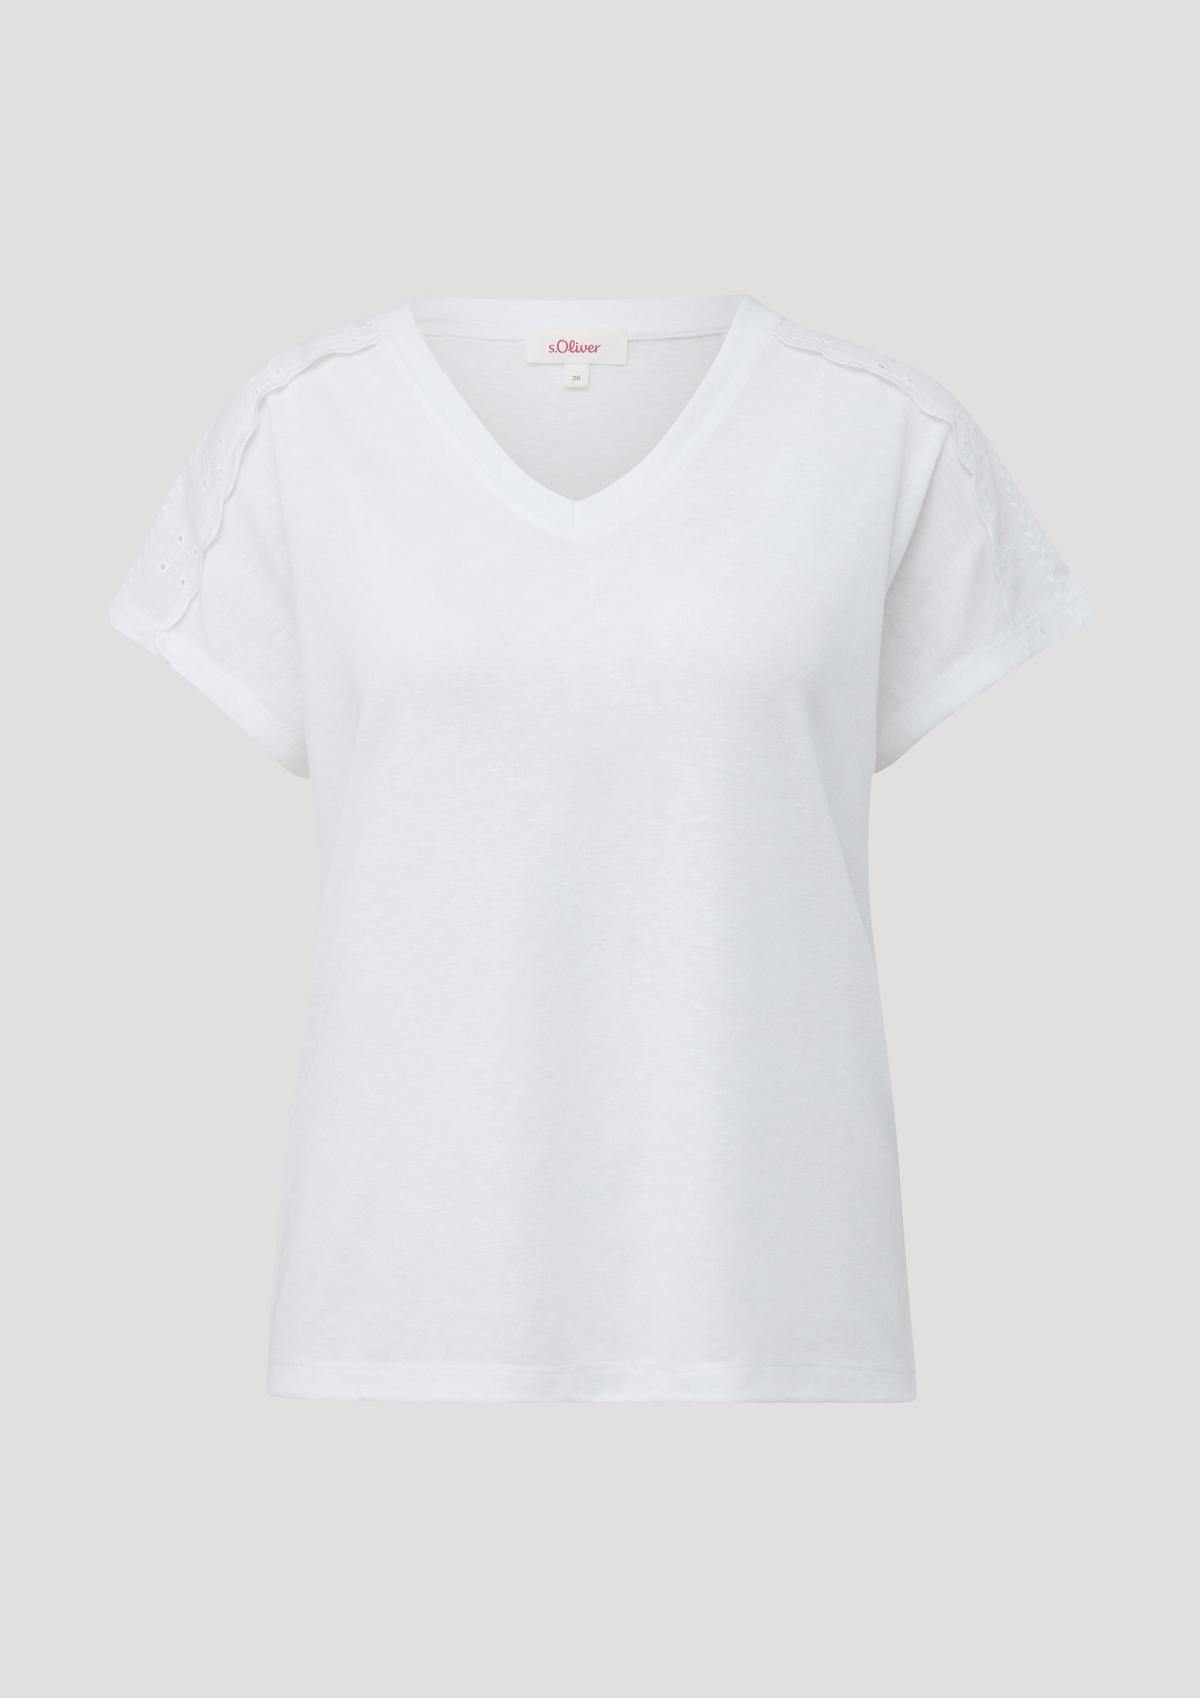 s.Oliver Jersey-T-Shirt im Relaxed Fit mit Spitzendetails